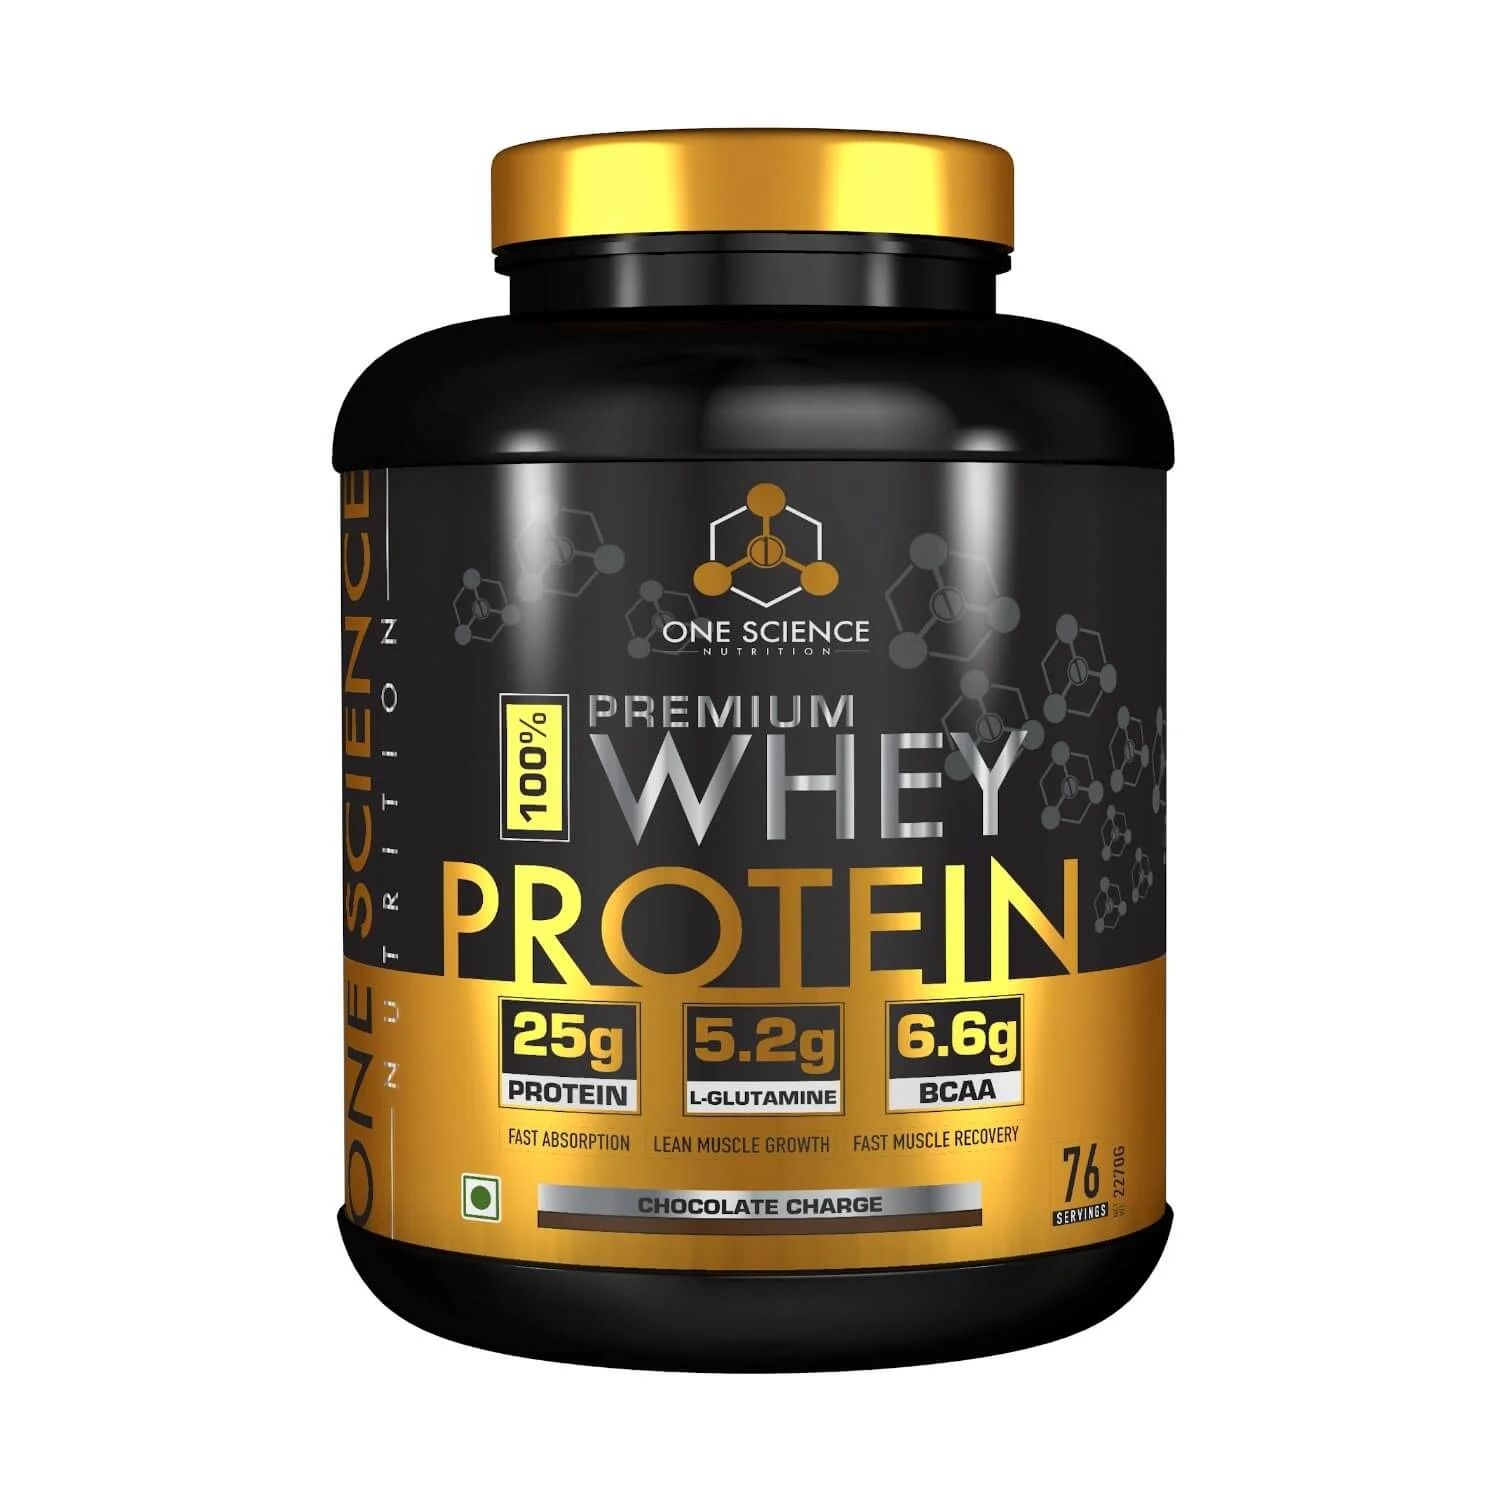 One Science Nutrition Whey Protein Chocolate Charge 5Lbs